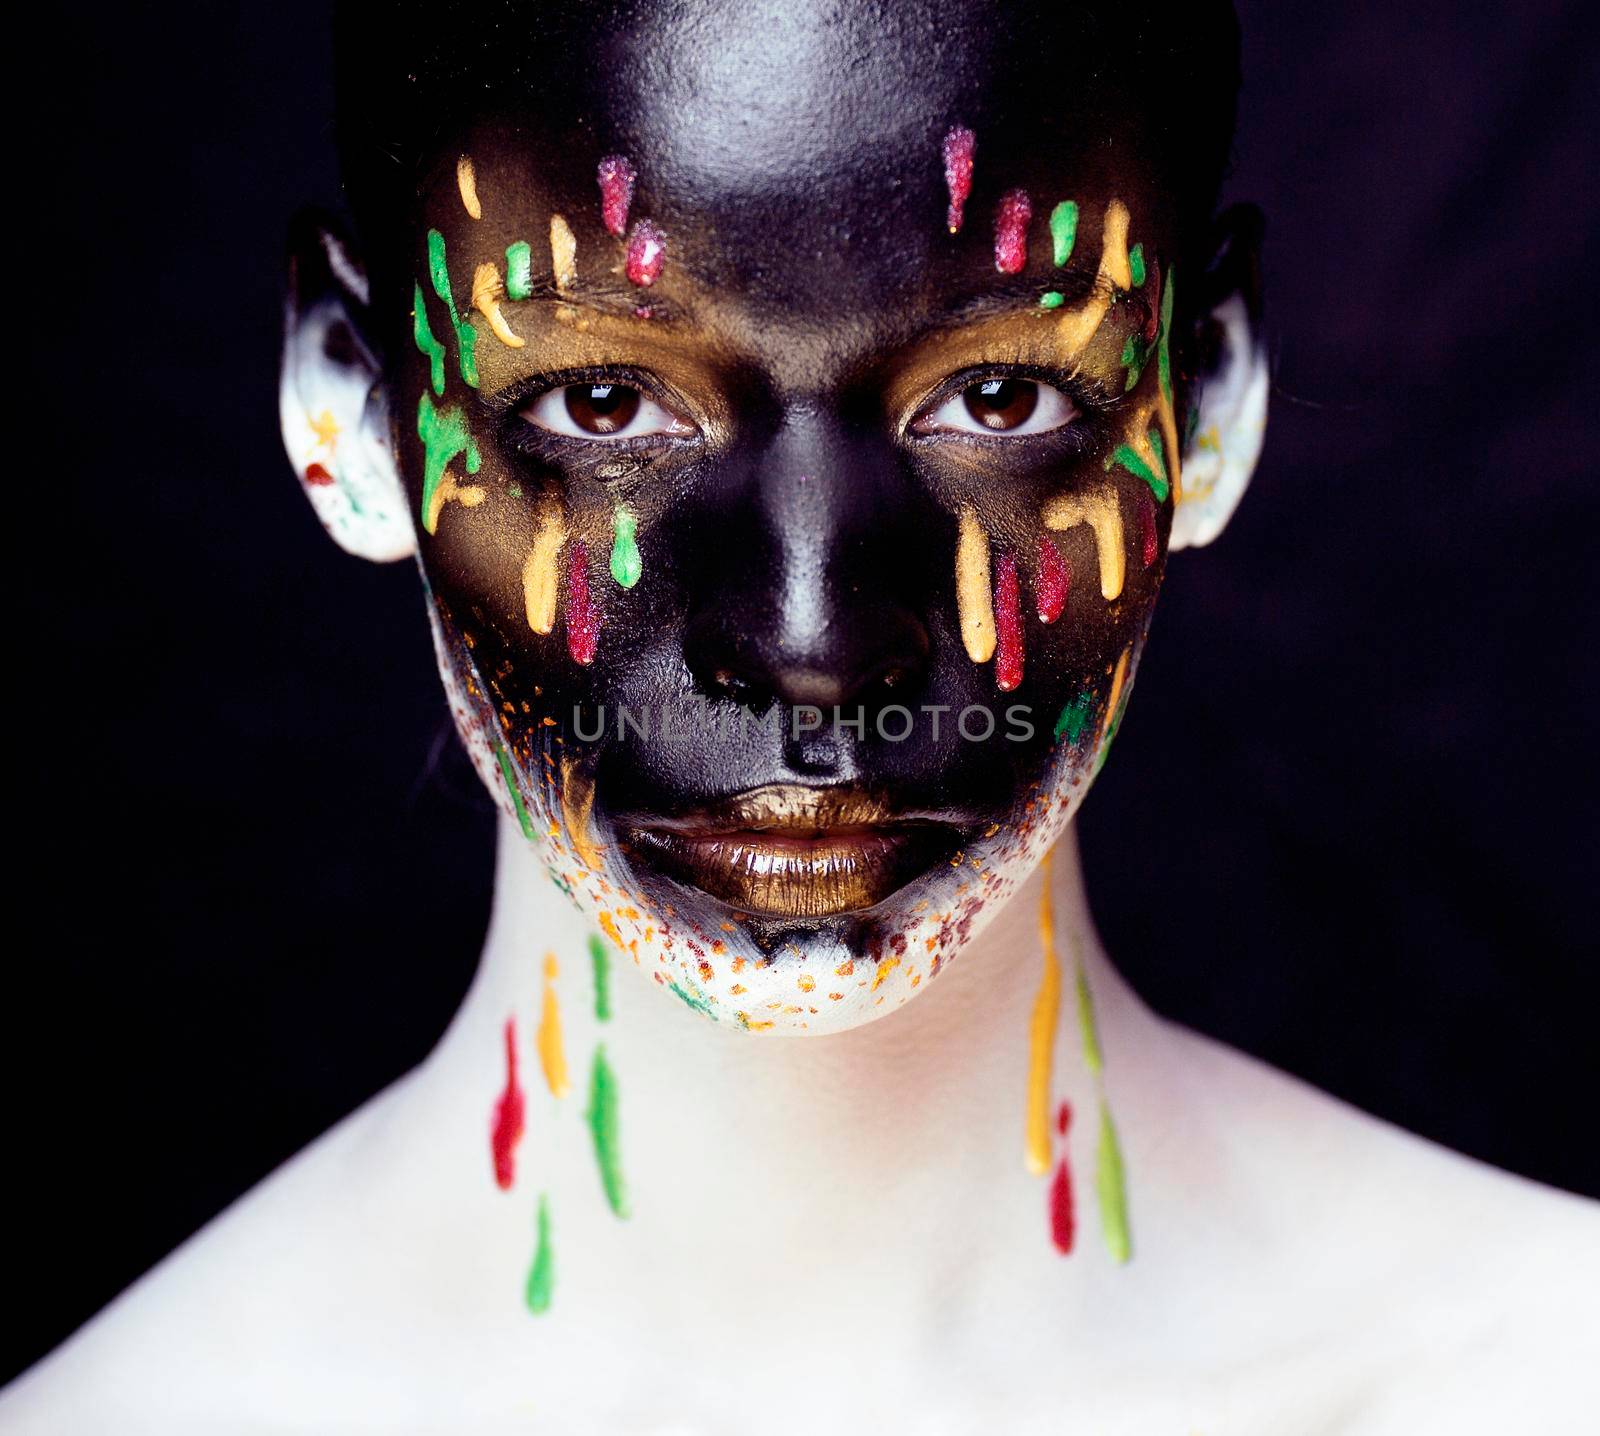 woman with creative makeup closeup like drops of colors, facepaint splashes close up halloween